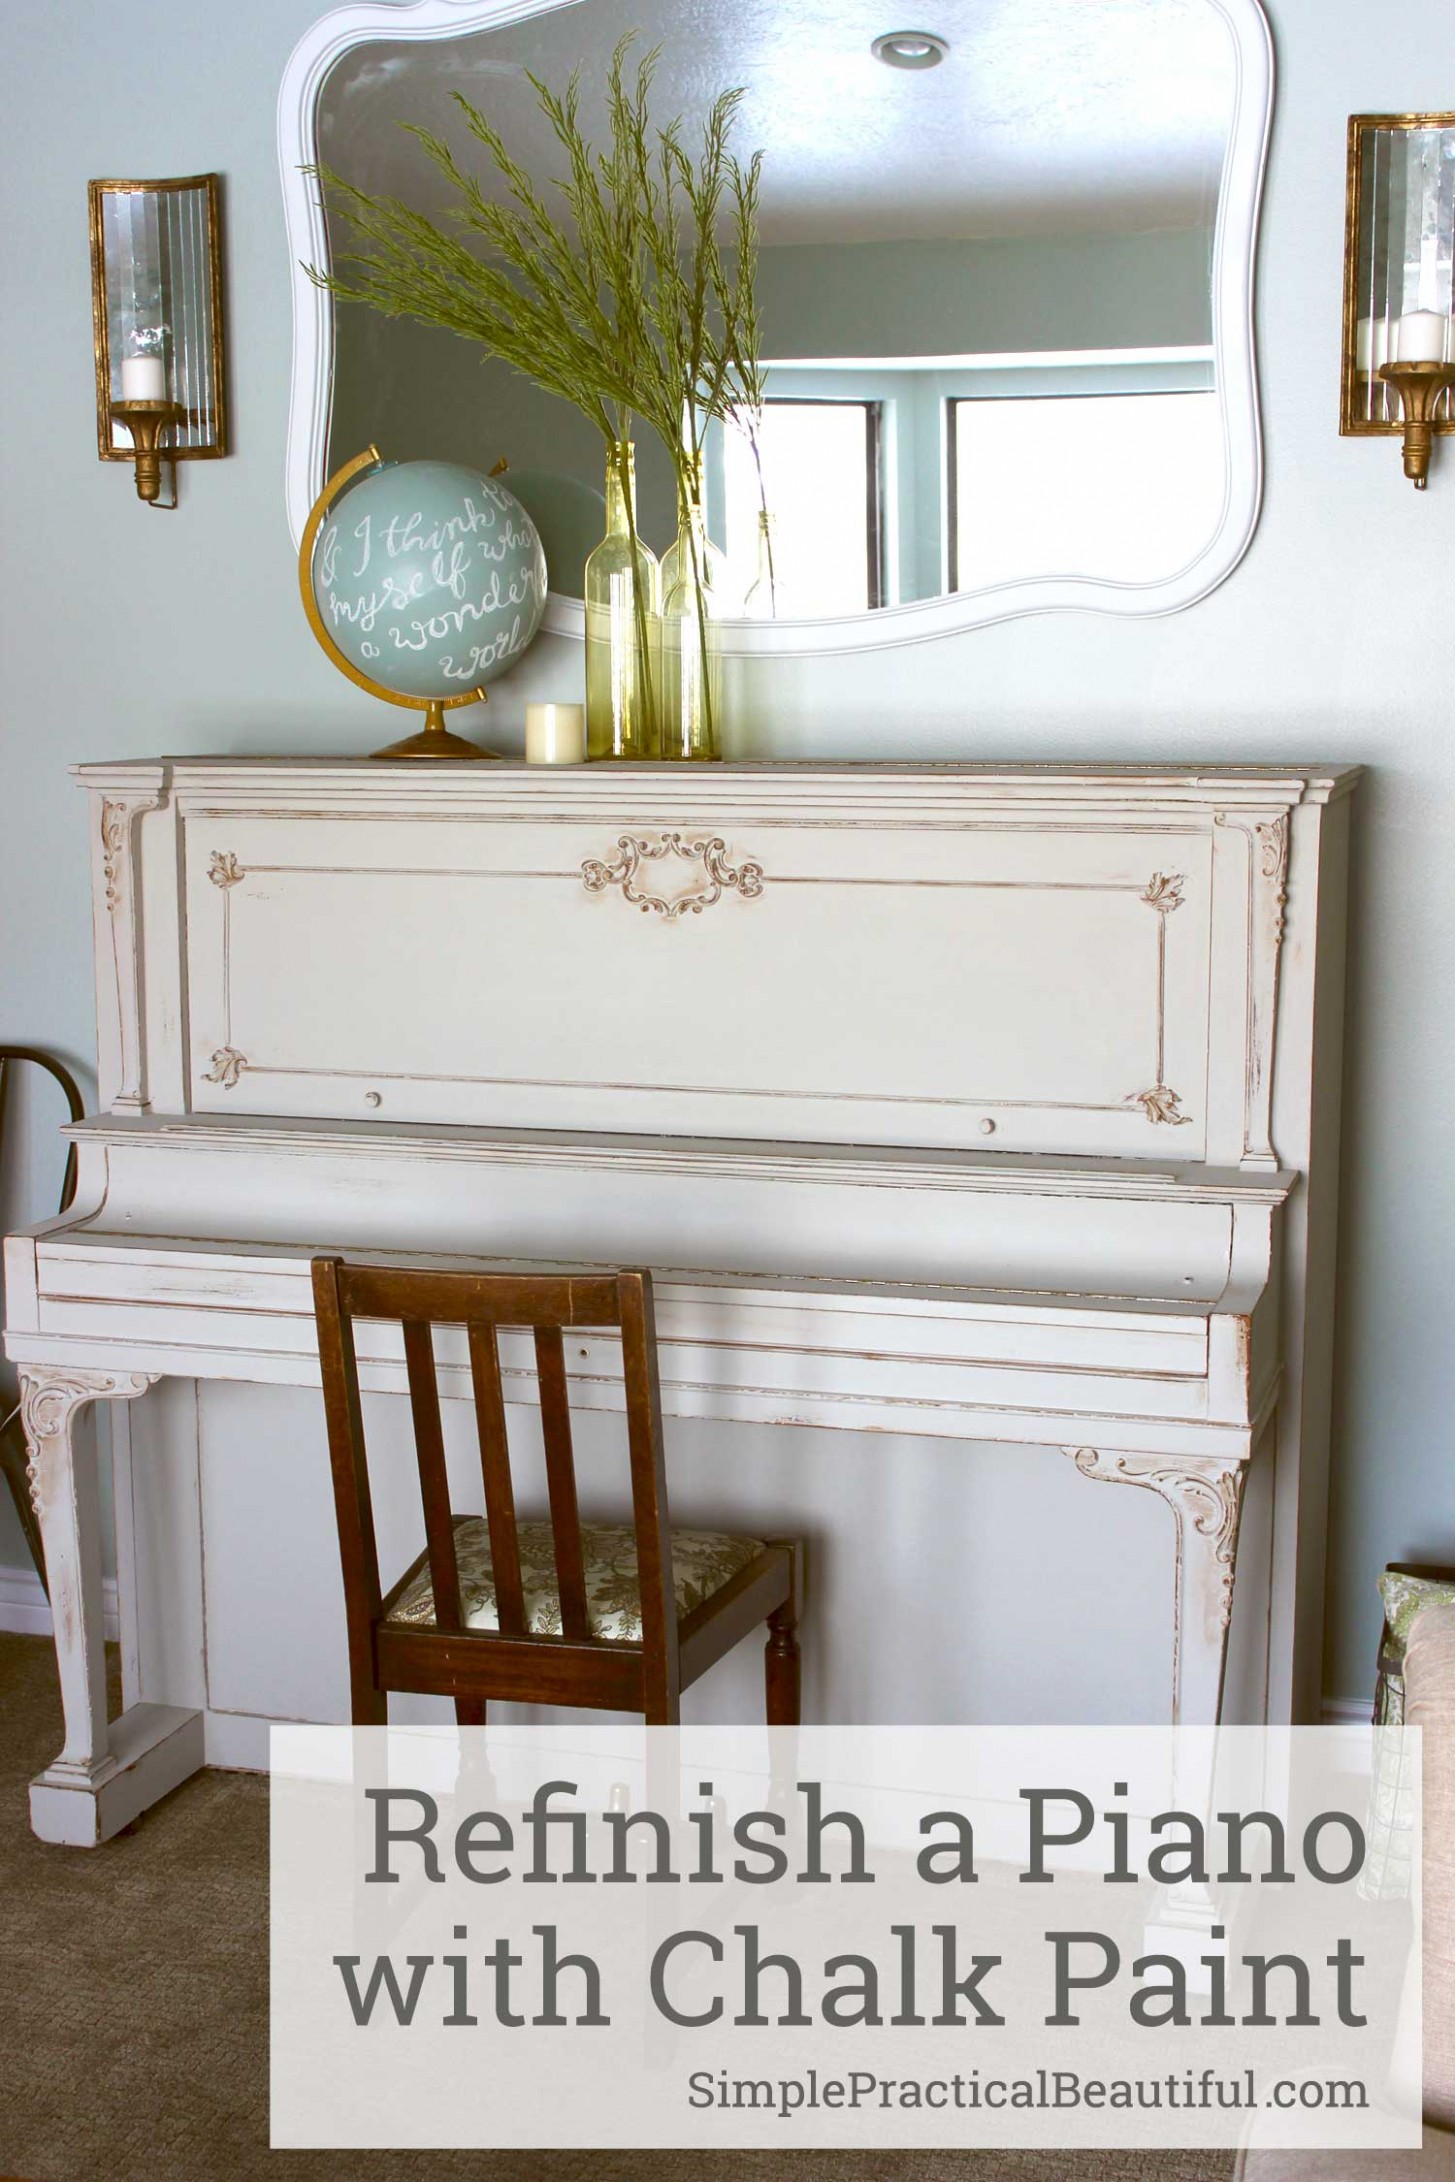 Refinish A Piano With Chalk Paint | Simple Practical Beautiful How To Do Chalk Paint On Wood